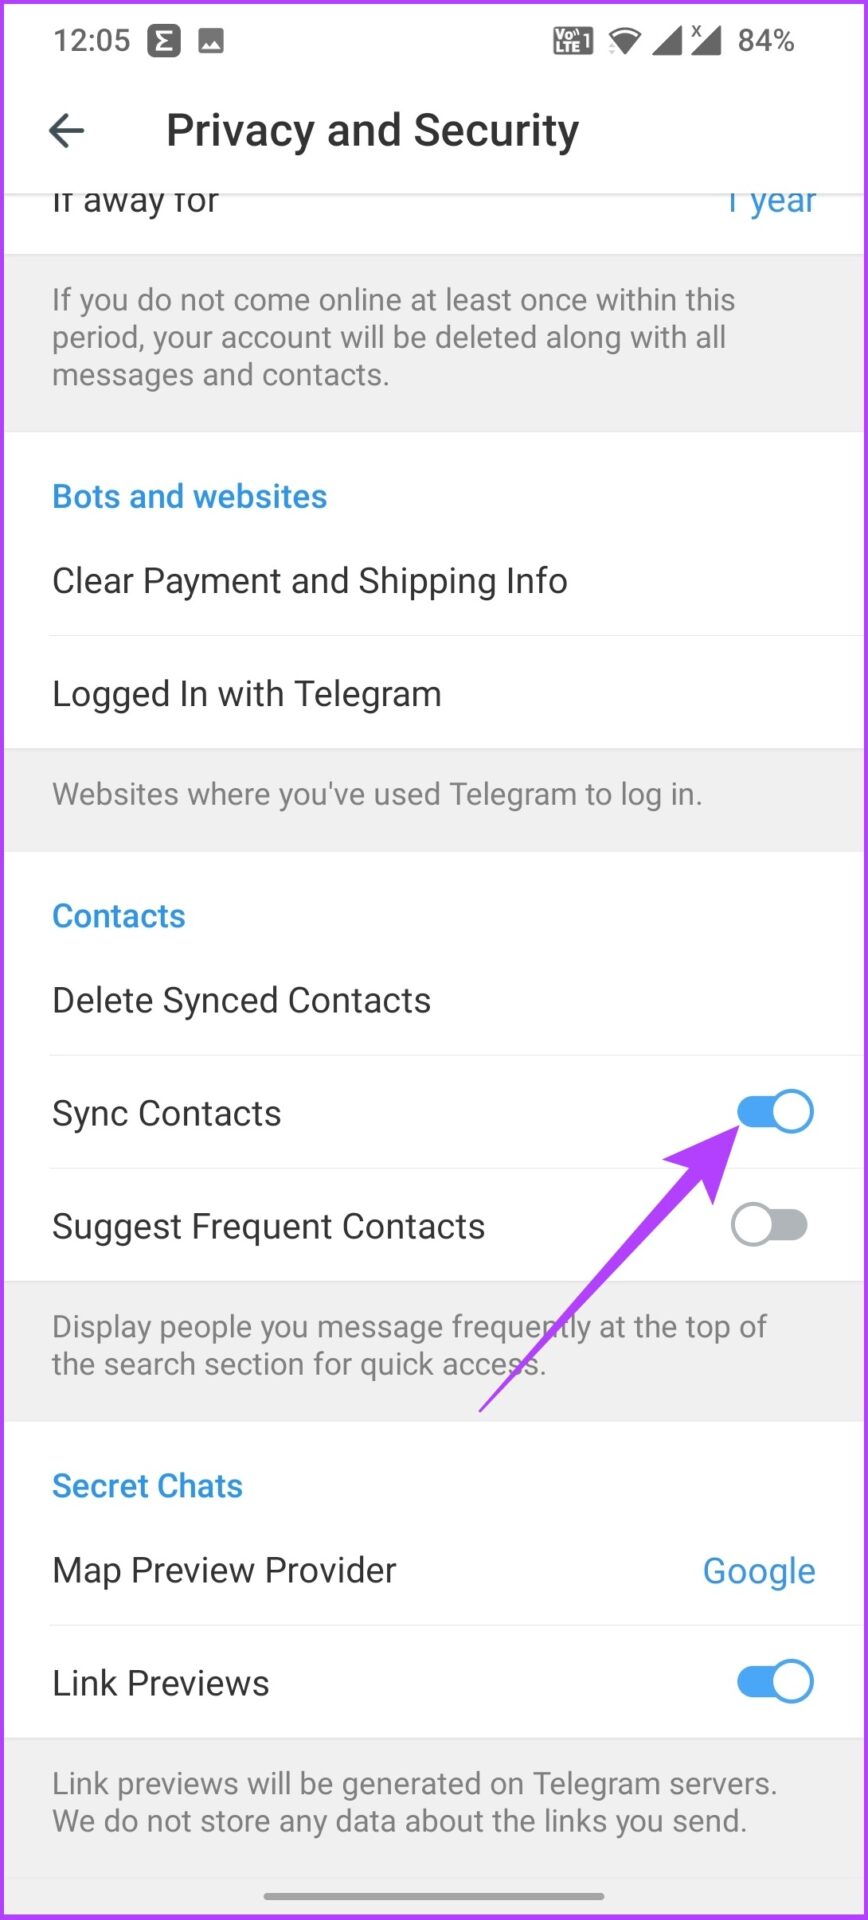 Under Contacts, toggle off the Sync Contact option